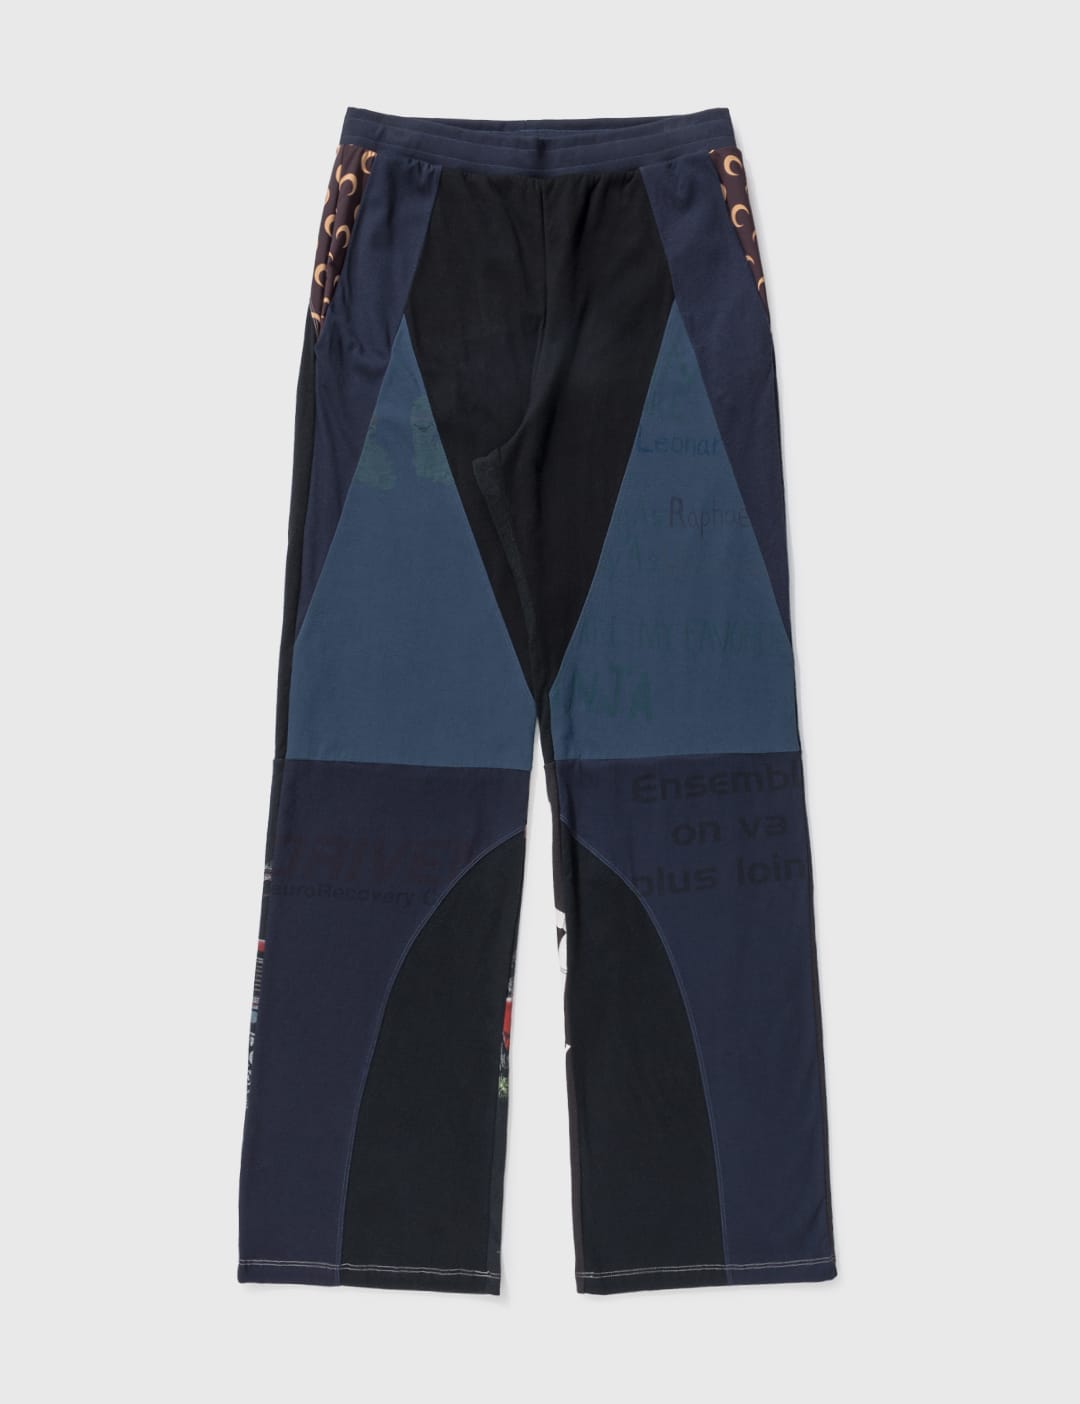 Buy Track Pants Online Best Prices in India | tlonline.in